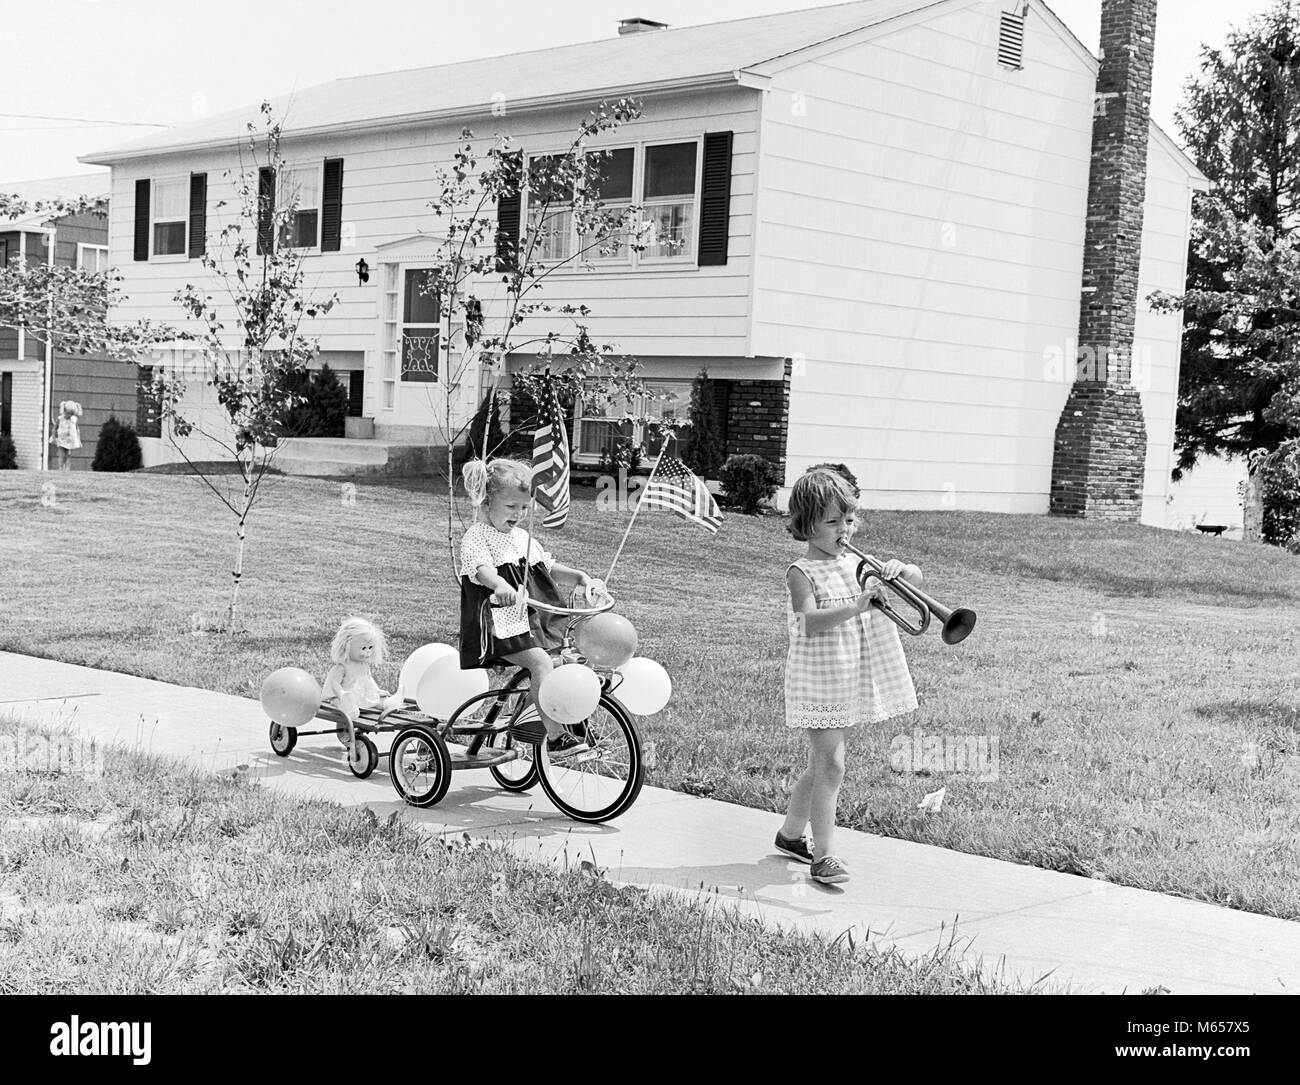 1960s GIRL WITH BUGLE LEADING SISTER ON TRICYCLE DECORATED WITH BALLOONS AMERICAN FLAGS FOR JULY 4TH HOLIDAY SIDEWALK PARADE - j12200 HAR001 HARS FEMALES 4TH HEALTHINESS HOME LIFE COPY SPACE PEOPLE CHILDREN FRIENDSHIP FULL-LENGTH FOURTH SIBLINGS AMERICANA DECORATED SISTERS NOSTALGIA LEADING TOGETHERNESS 3-4 YEARS FREEDOM SUCCESS 5-6 YEARS HAPPINESS TRICYCLE NEIGHBORHOOD EXCITEMENT LEADERSHIP RECREATION PRIDE SUPPORT MARCH SIBLING MUSICAL INSTRUMENT PATRIOTIC WAGONS BUGLE JUVENILES AMERICAN FLAG B&W BLACK AND WHITE BUGLES CAUCASIAN ETHNICITY JULY 4TH MEMORIAL DAY OLD FASHIONED PARADES TRICYCLES Stock Photo